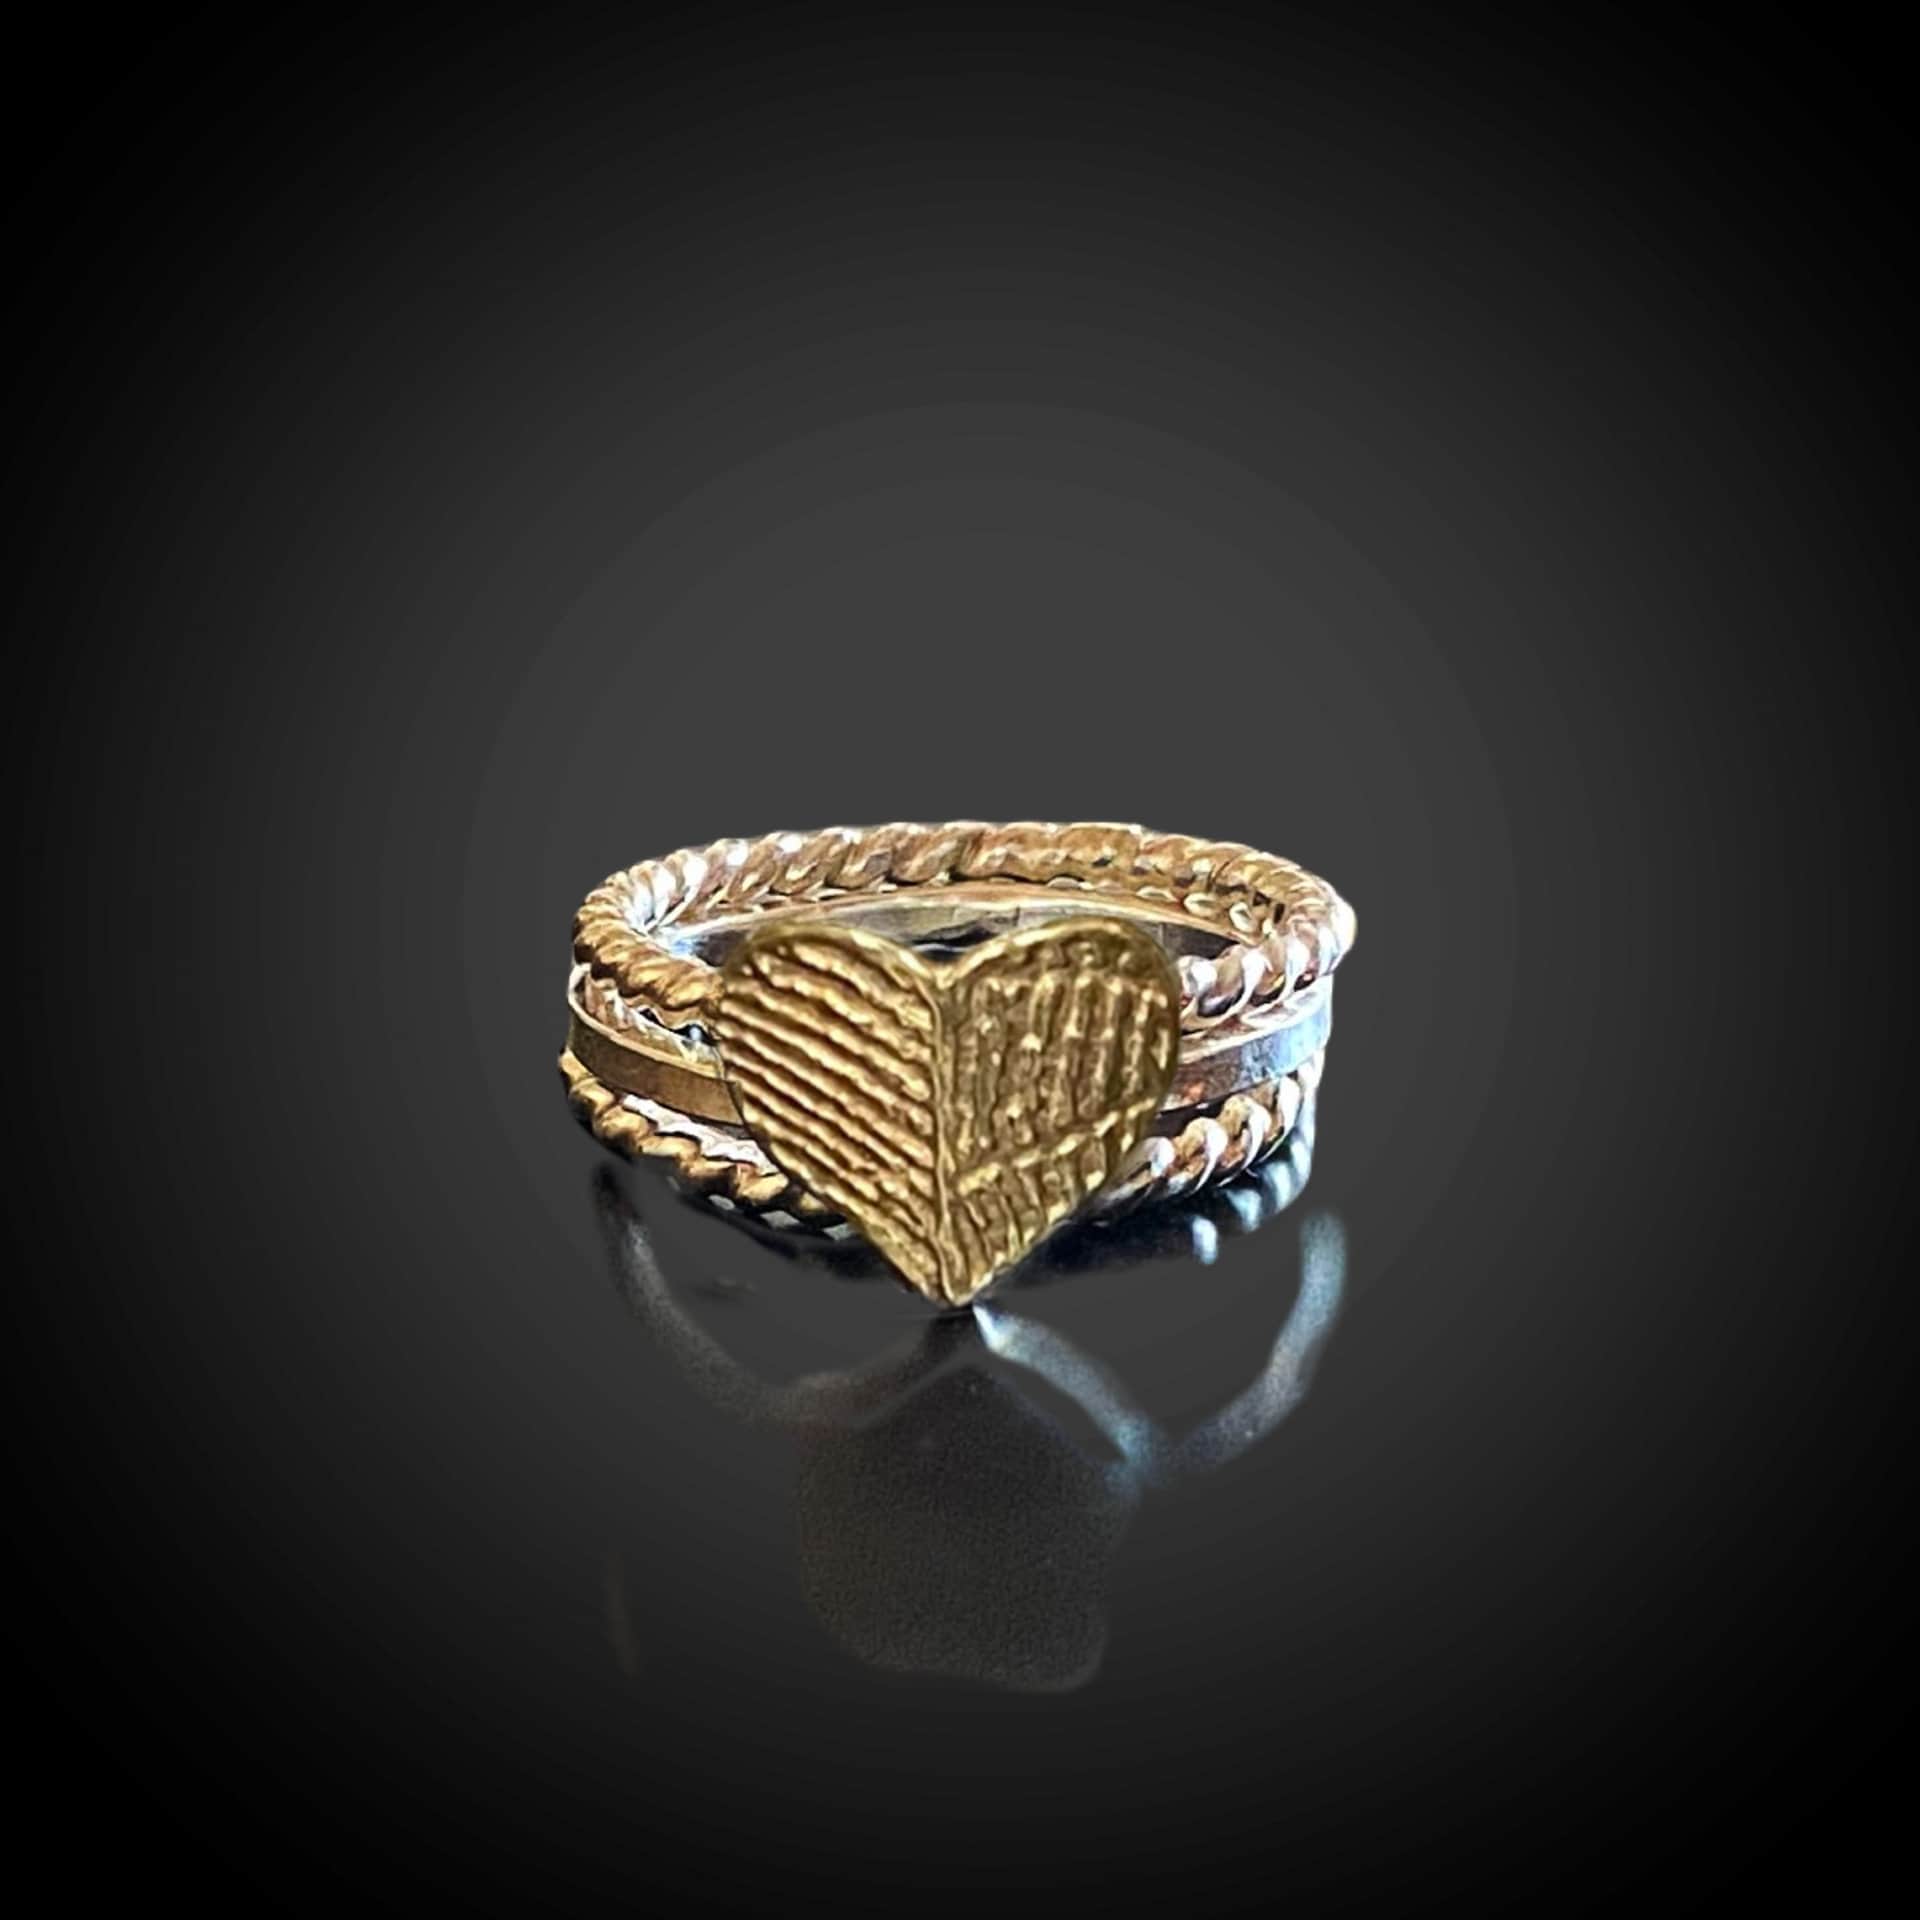 Stacking Square & Twist Fingerprint Rings | Sterling Silver with 24K Gold Plate